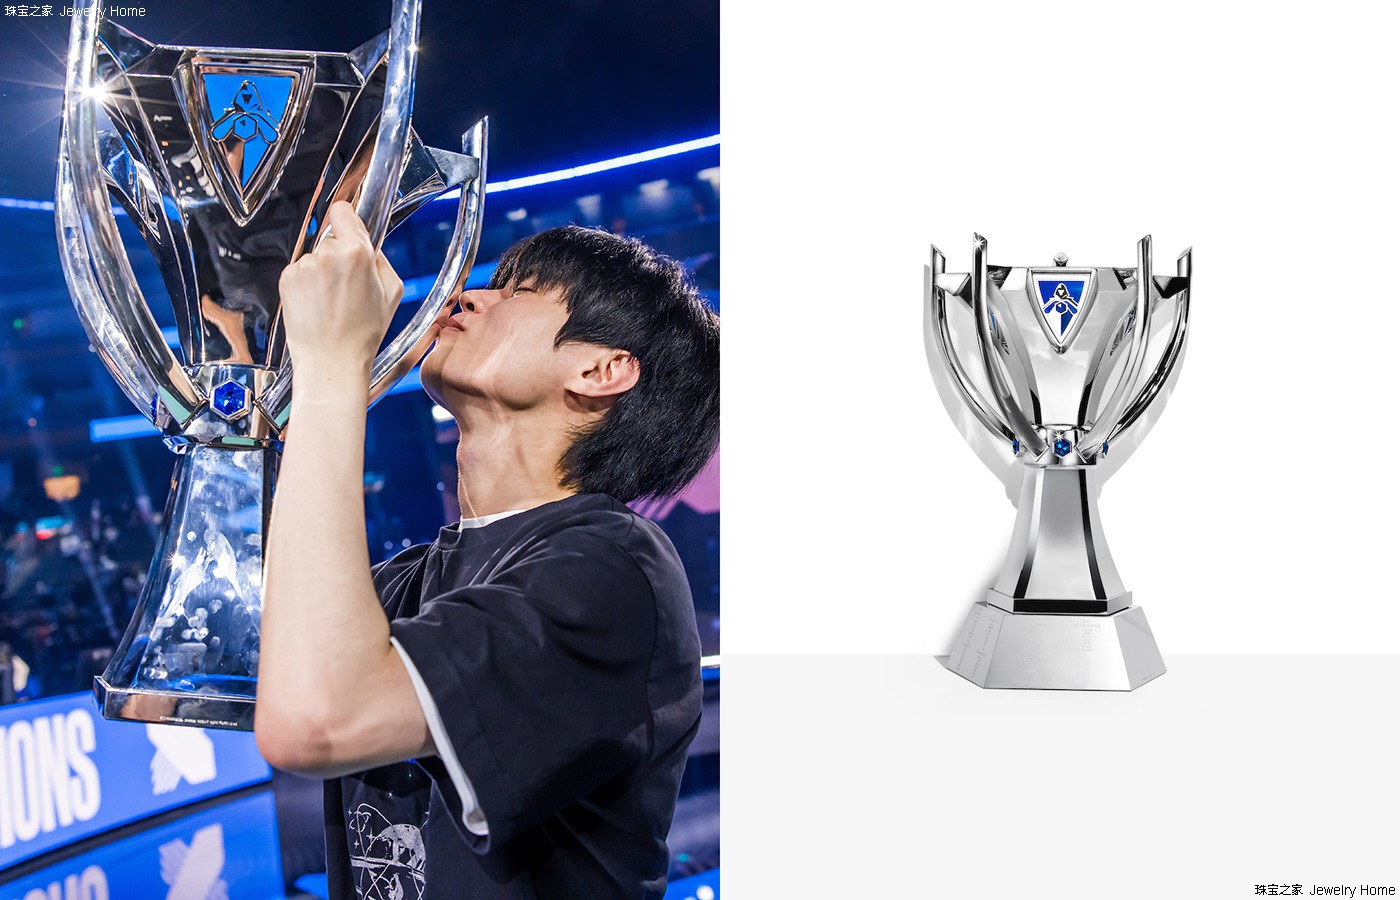 Drought over: Damwon Gaming crowned 2020 LoL world champion